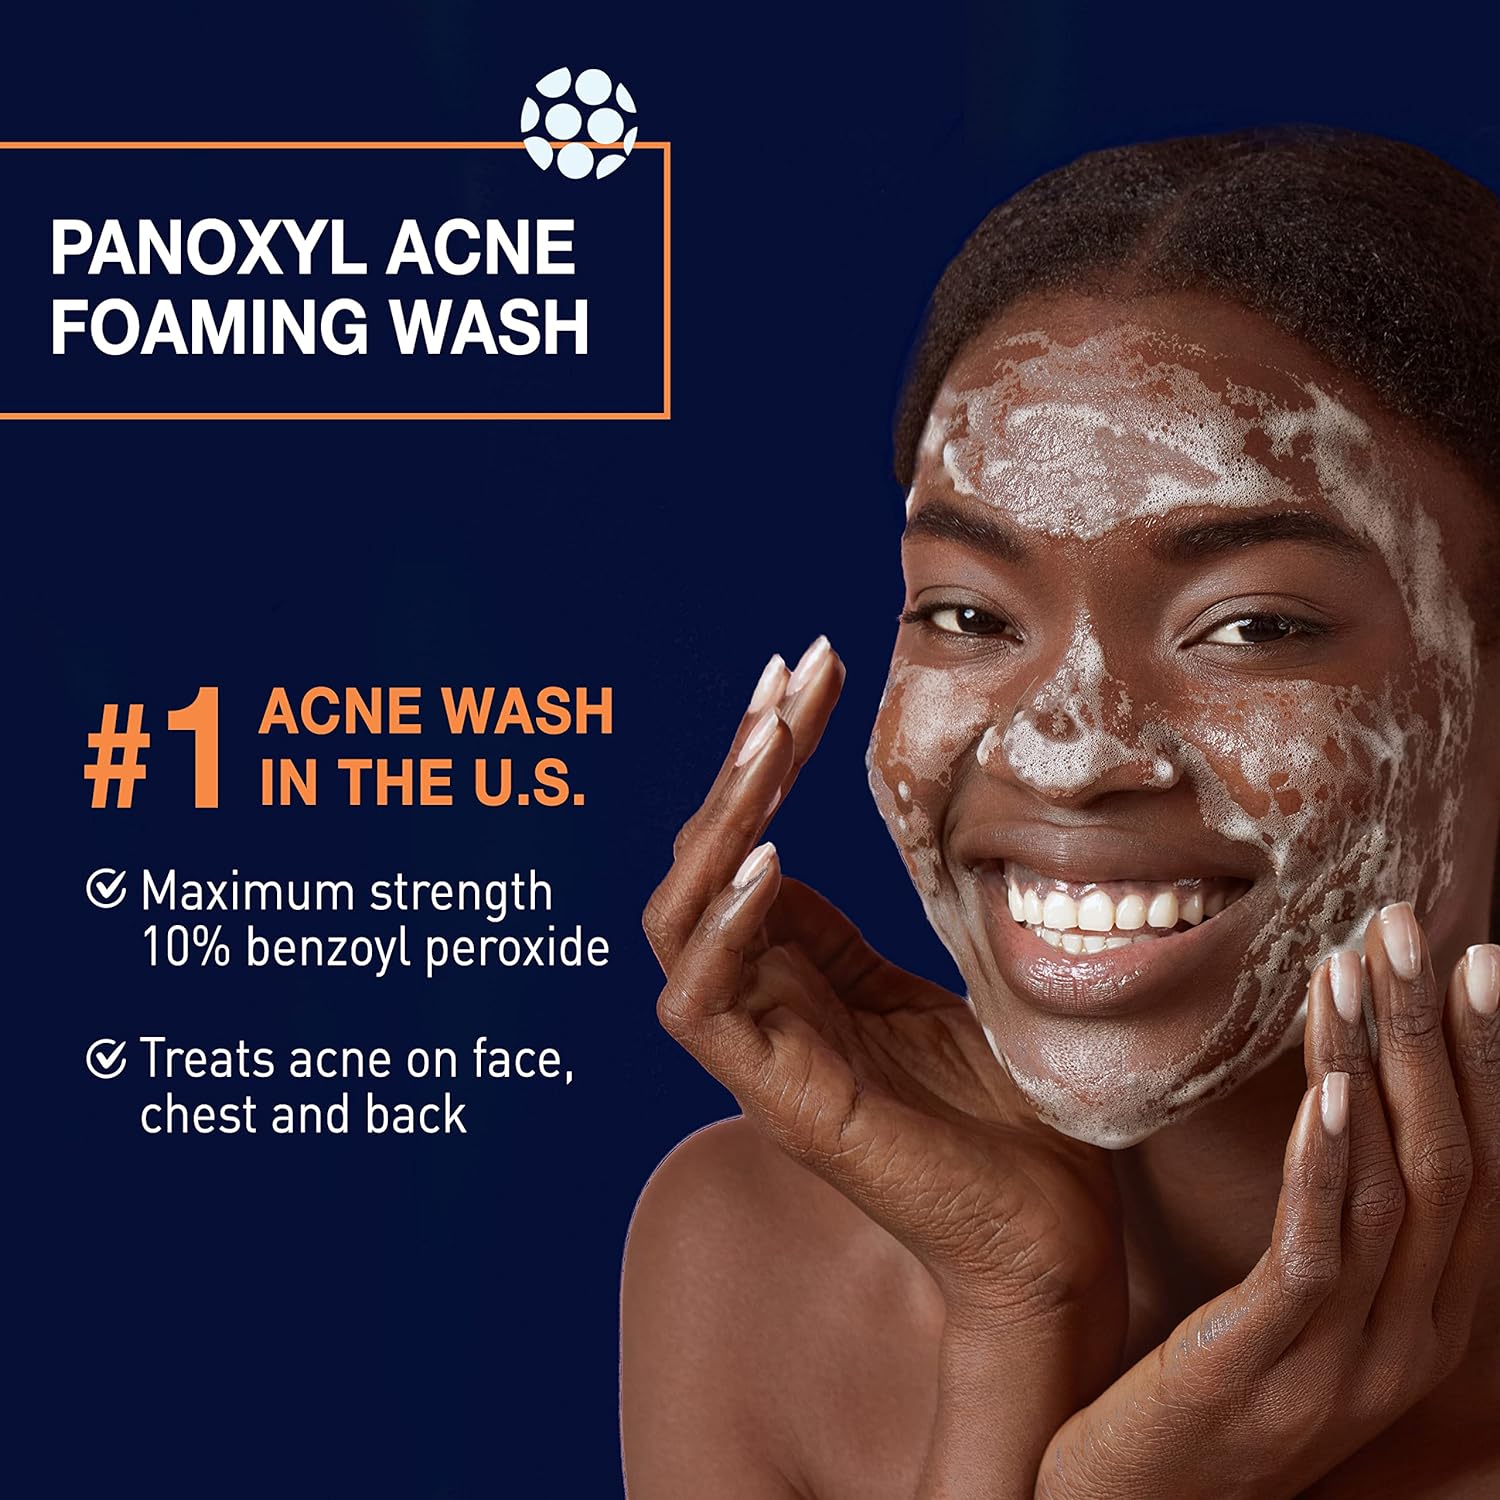 PanOxyl Foaming 10% Foaming Benzoyl Peroxide Acne Wash and Oil Control Moisturizer Bundle